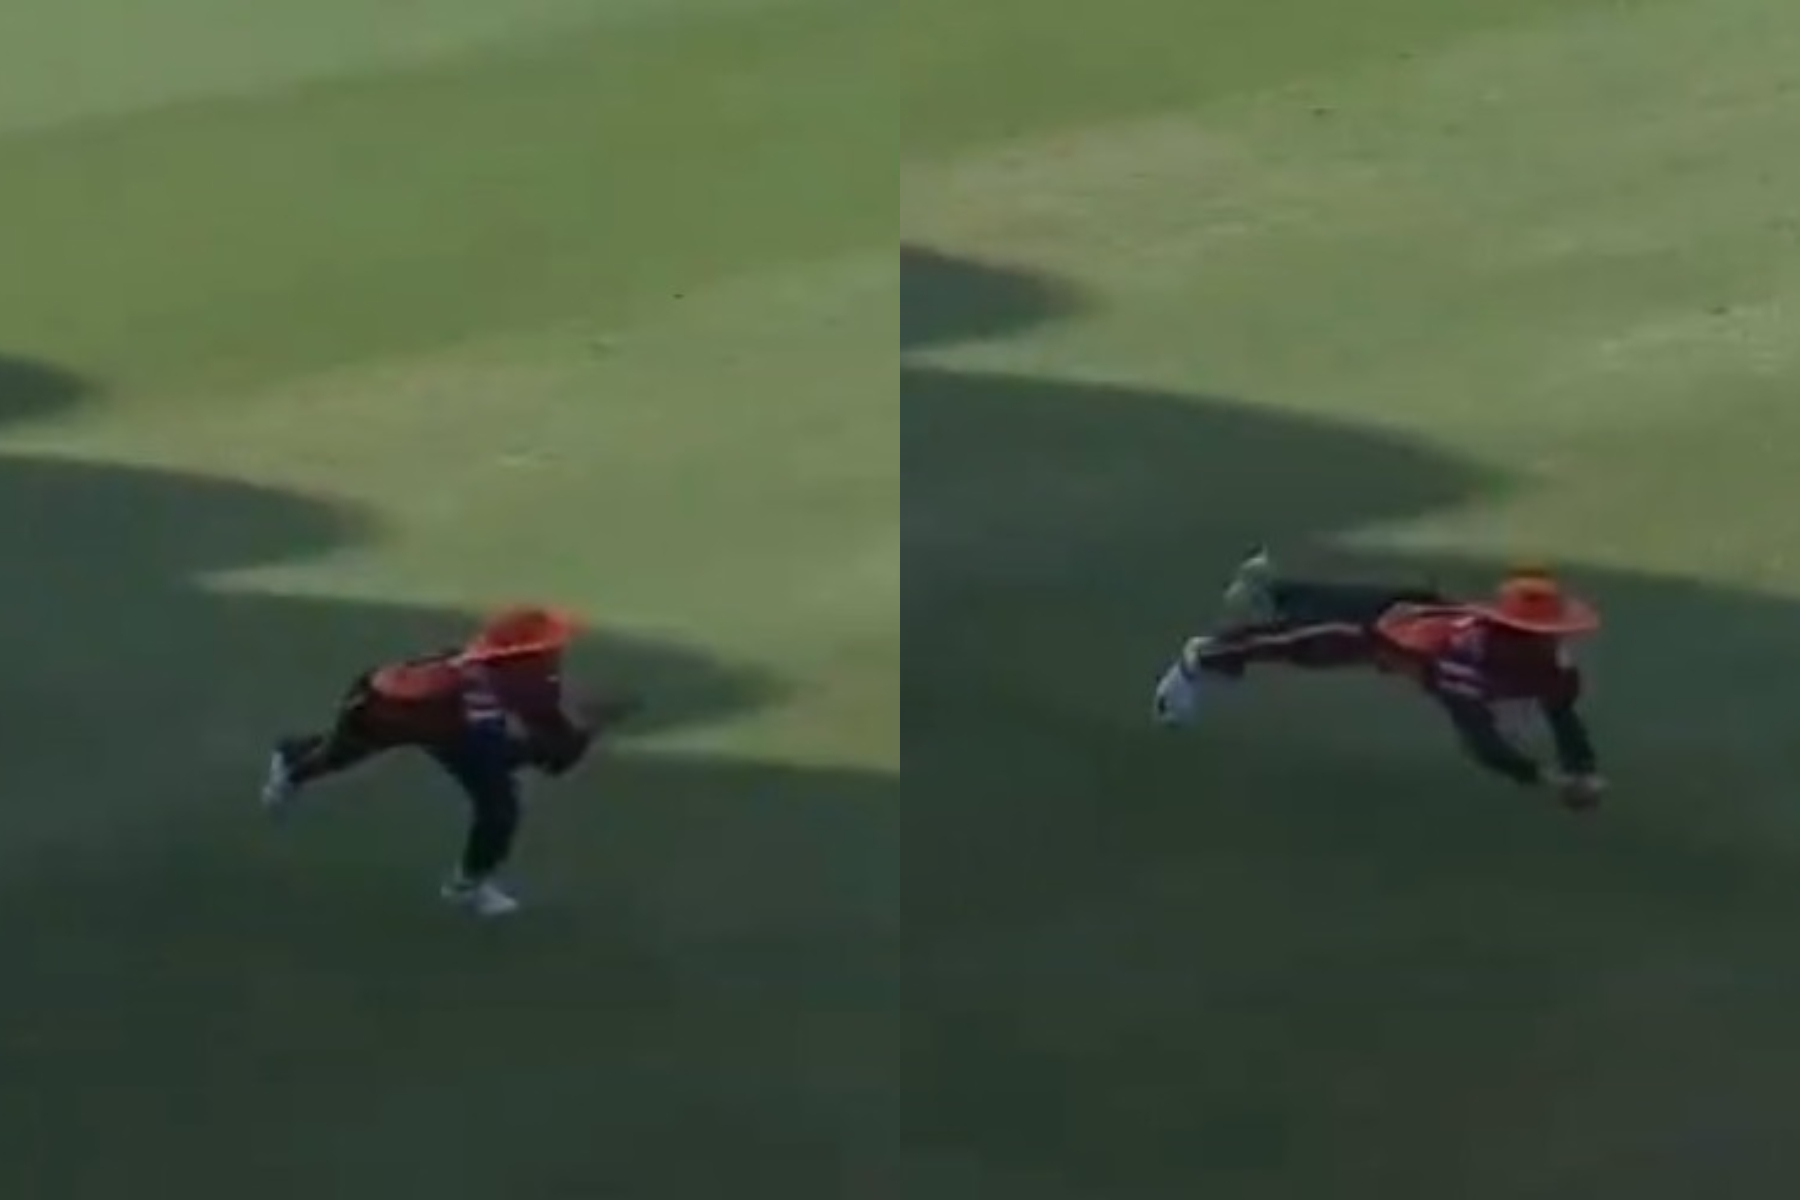 Manish Pandey took a beauty of a catch to dismiss Kishan